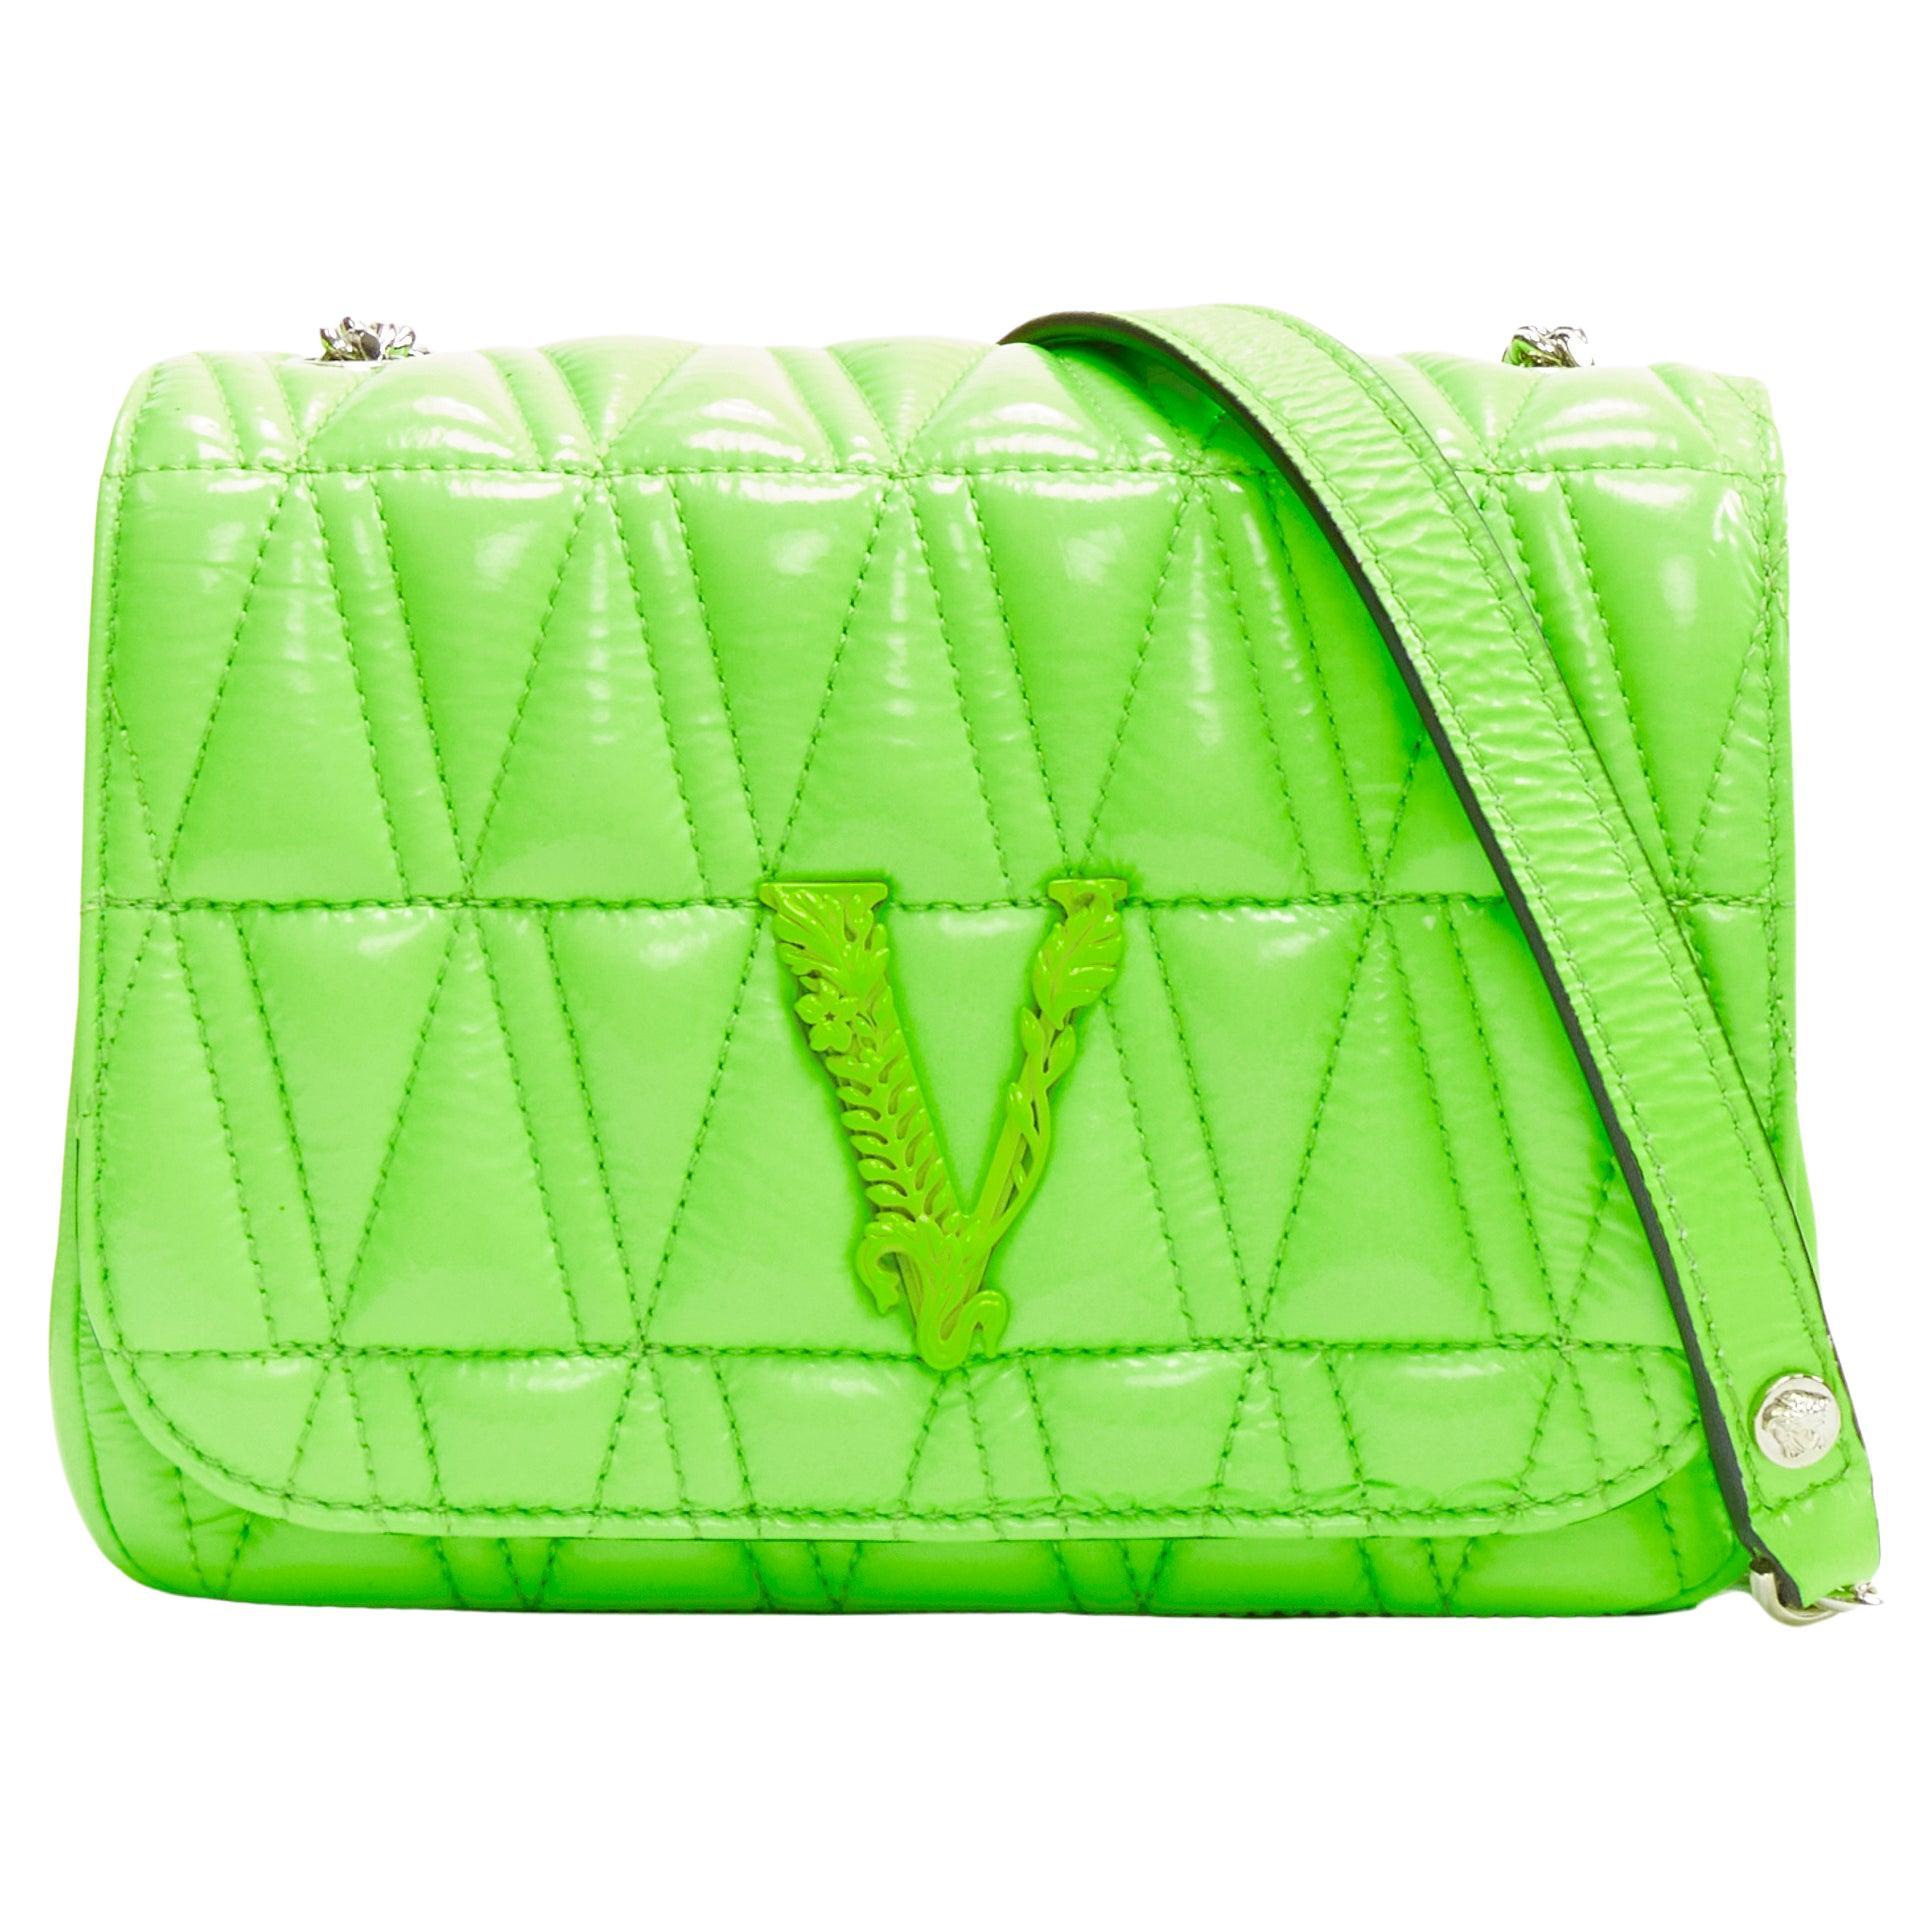 new VERSACE Virtus bright green V quilted patent leather crossbody flap bag